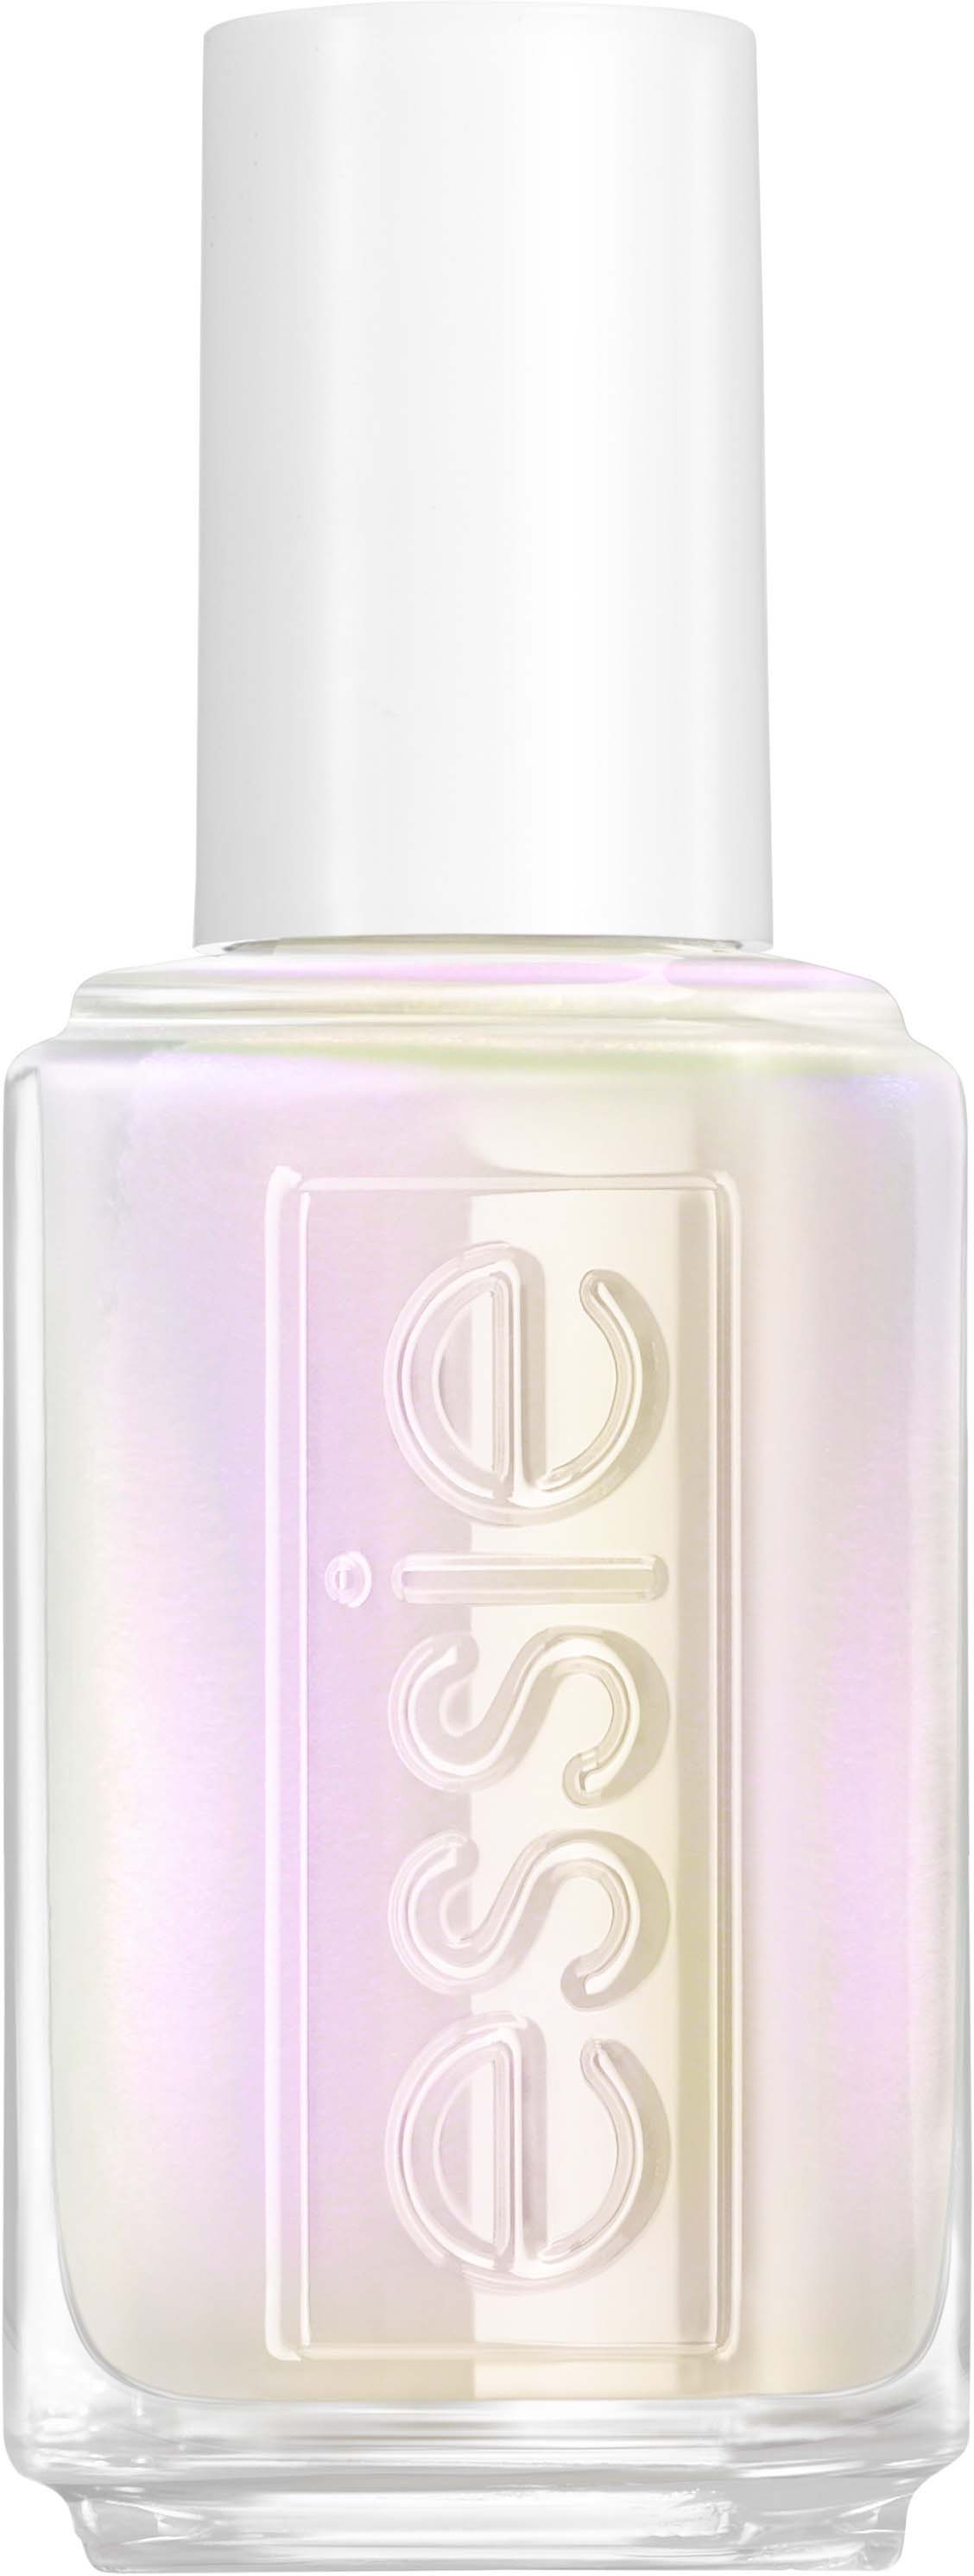 Essie Nail Expressie 460 Iced Coat Top 10 Filter ml FX Out